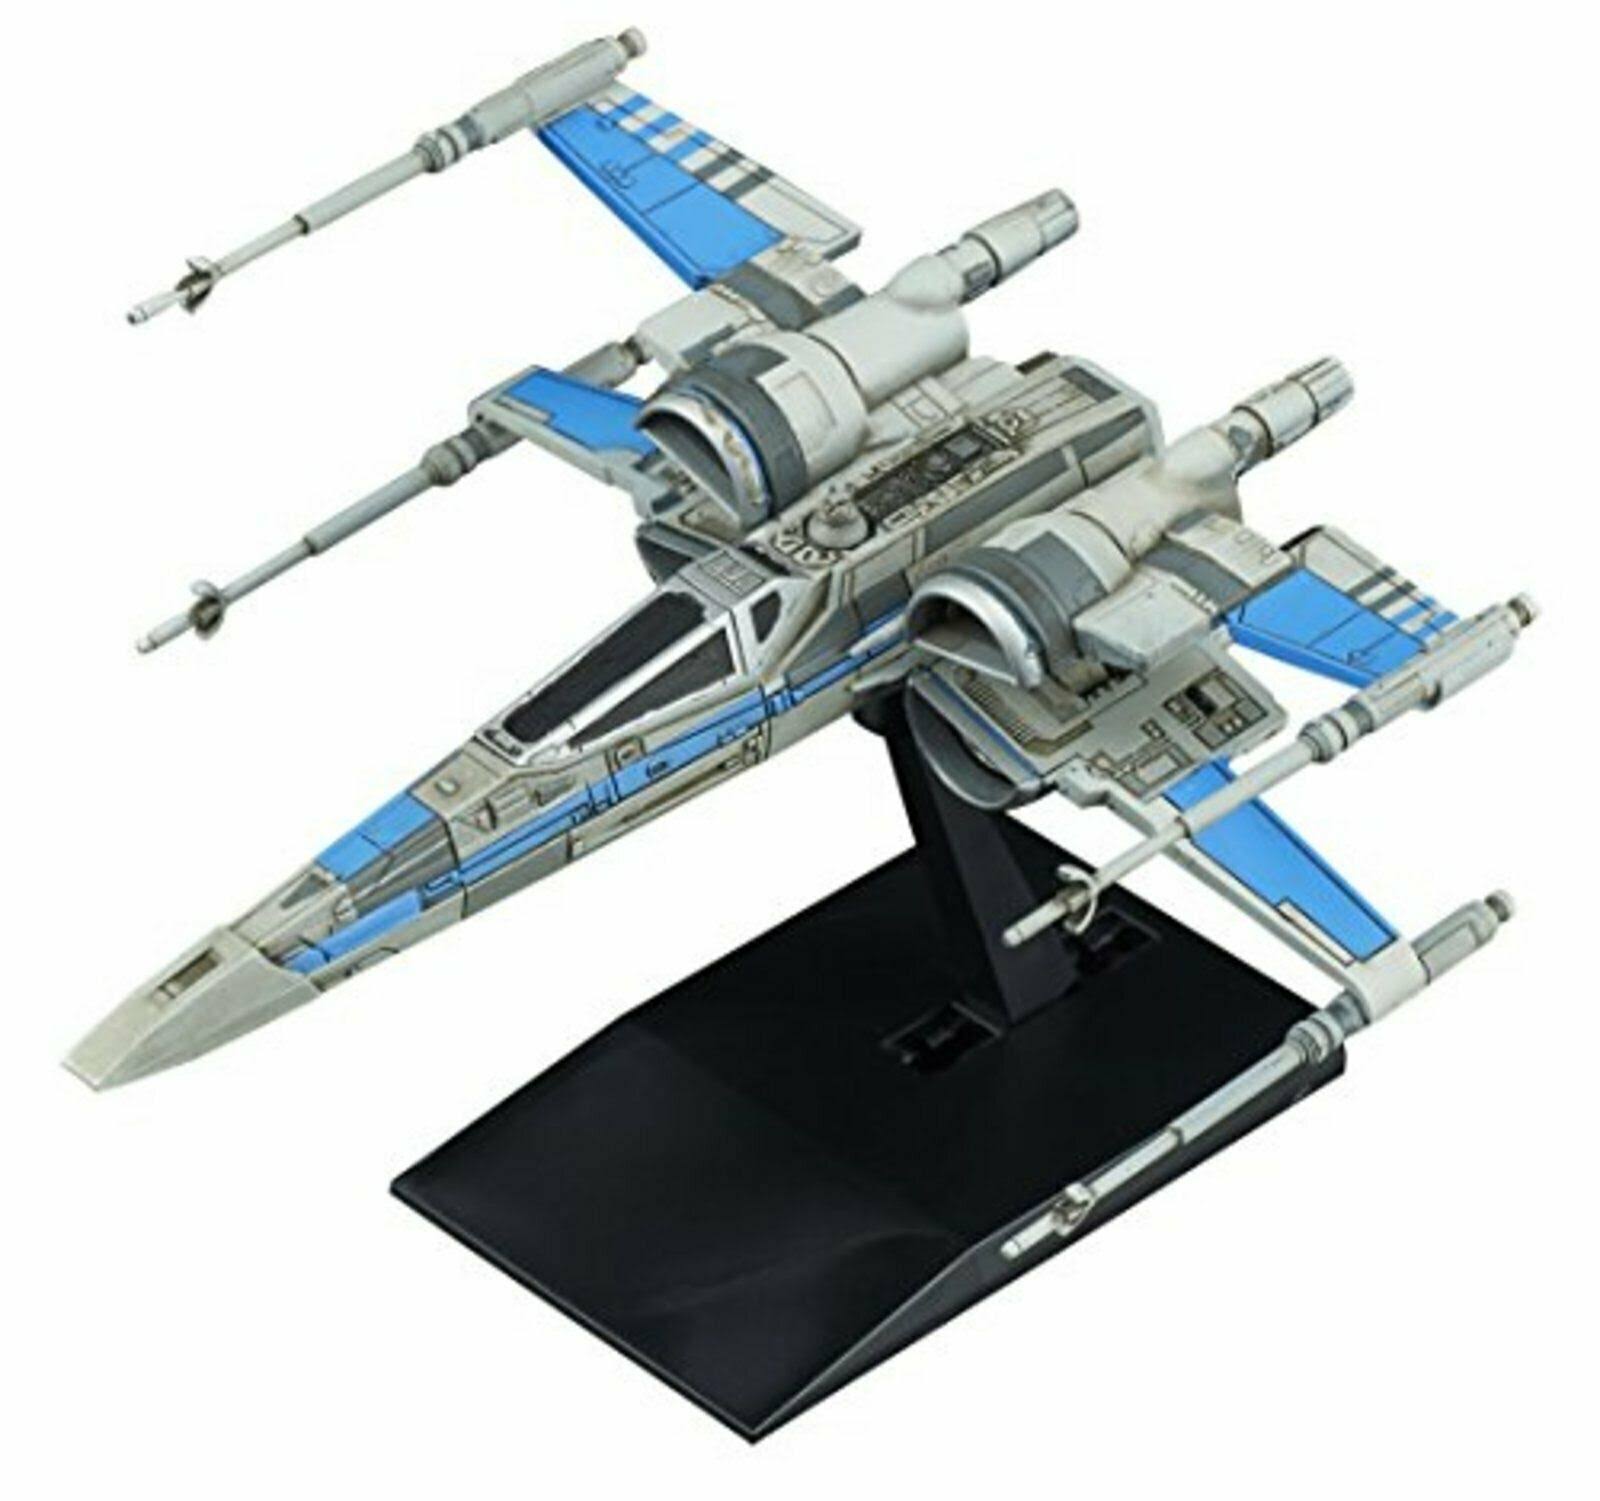 Star Wars Vehicle Model Blue Squadron Resistance X-Wing Fighter Plastic Model